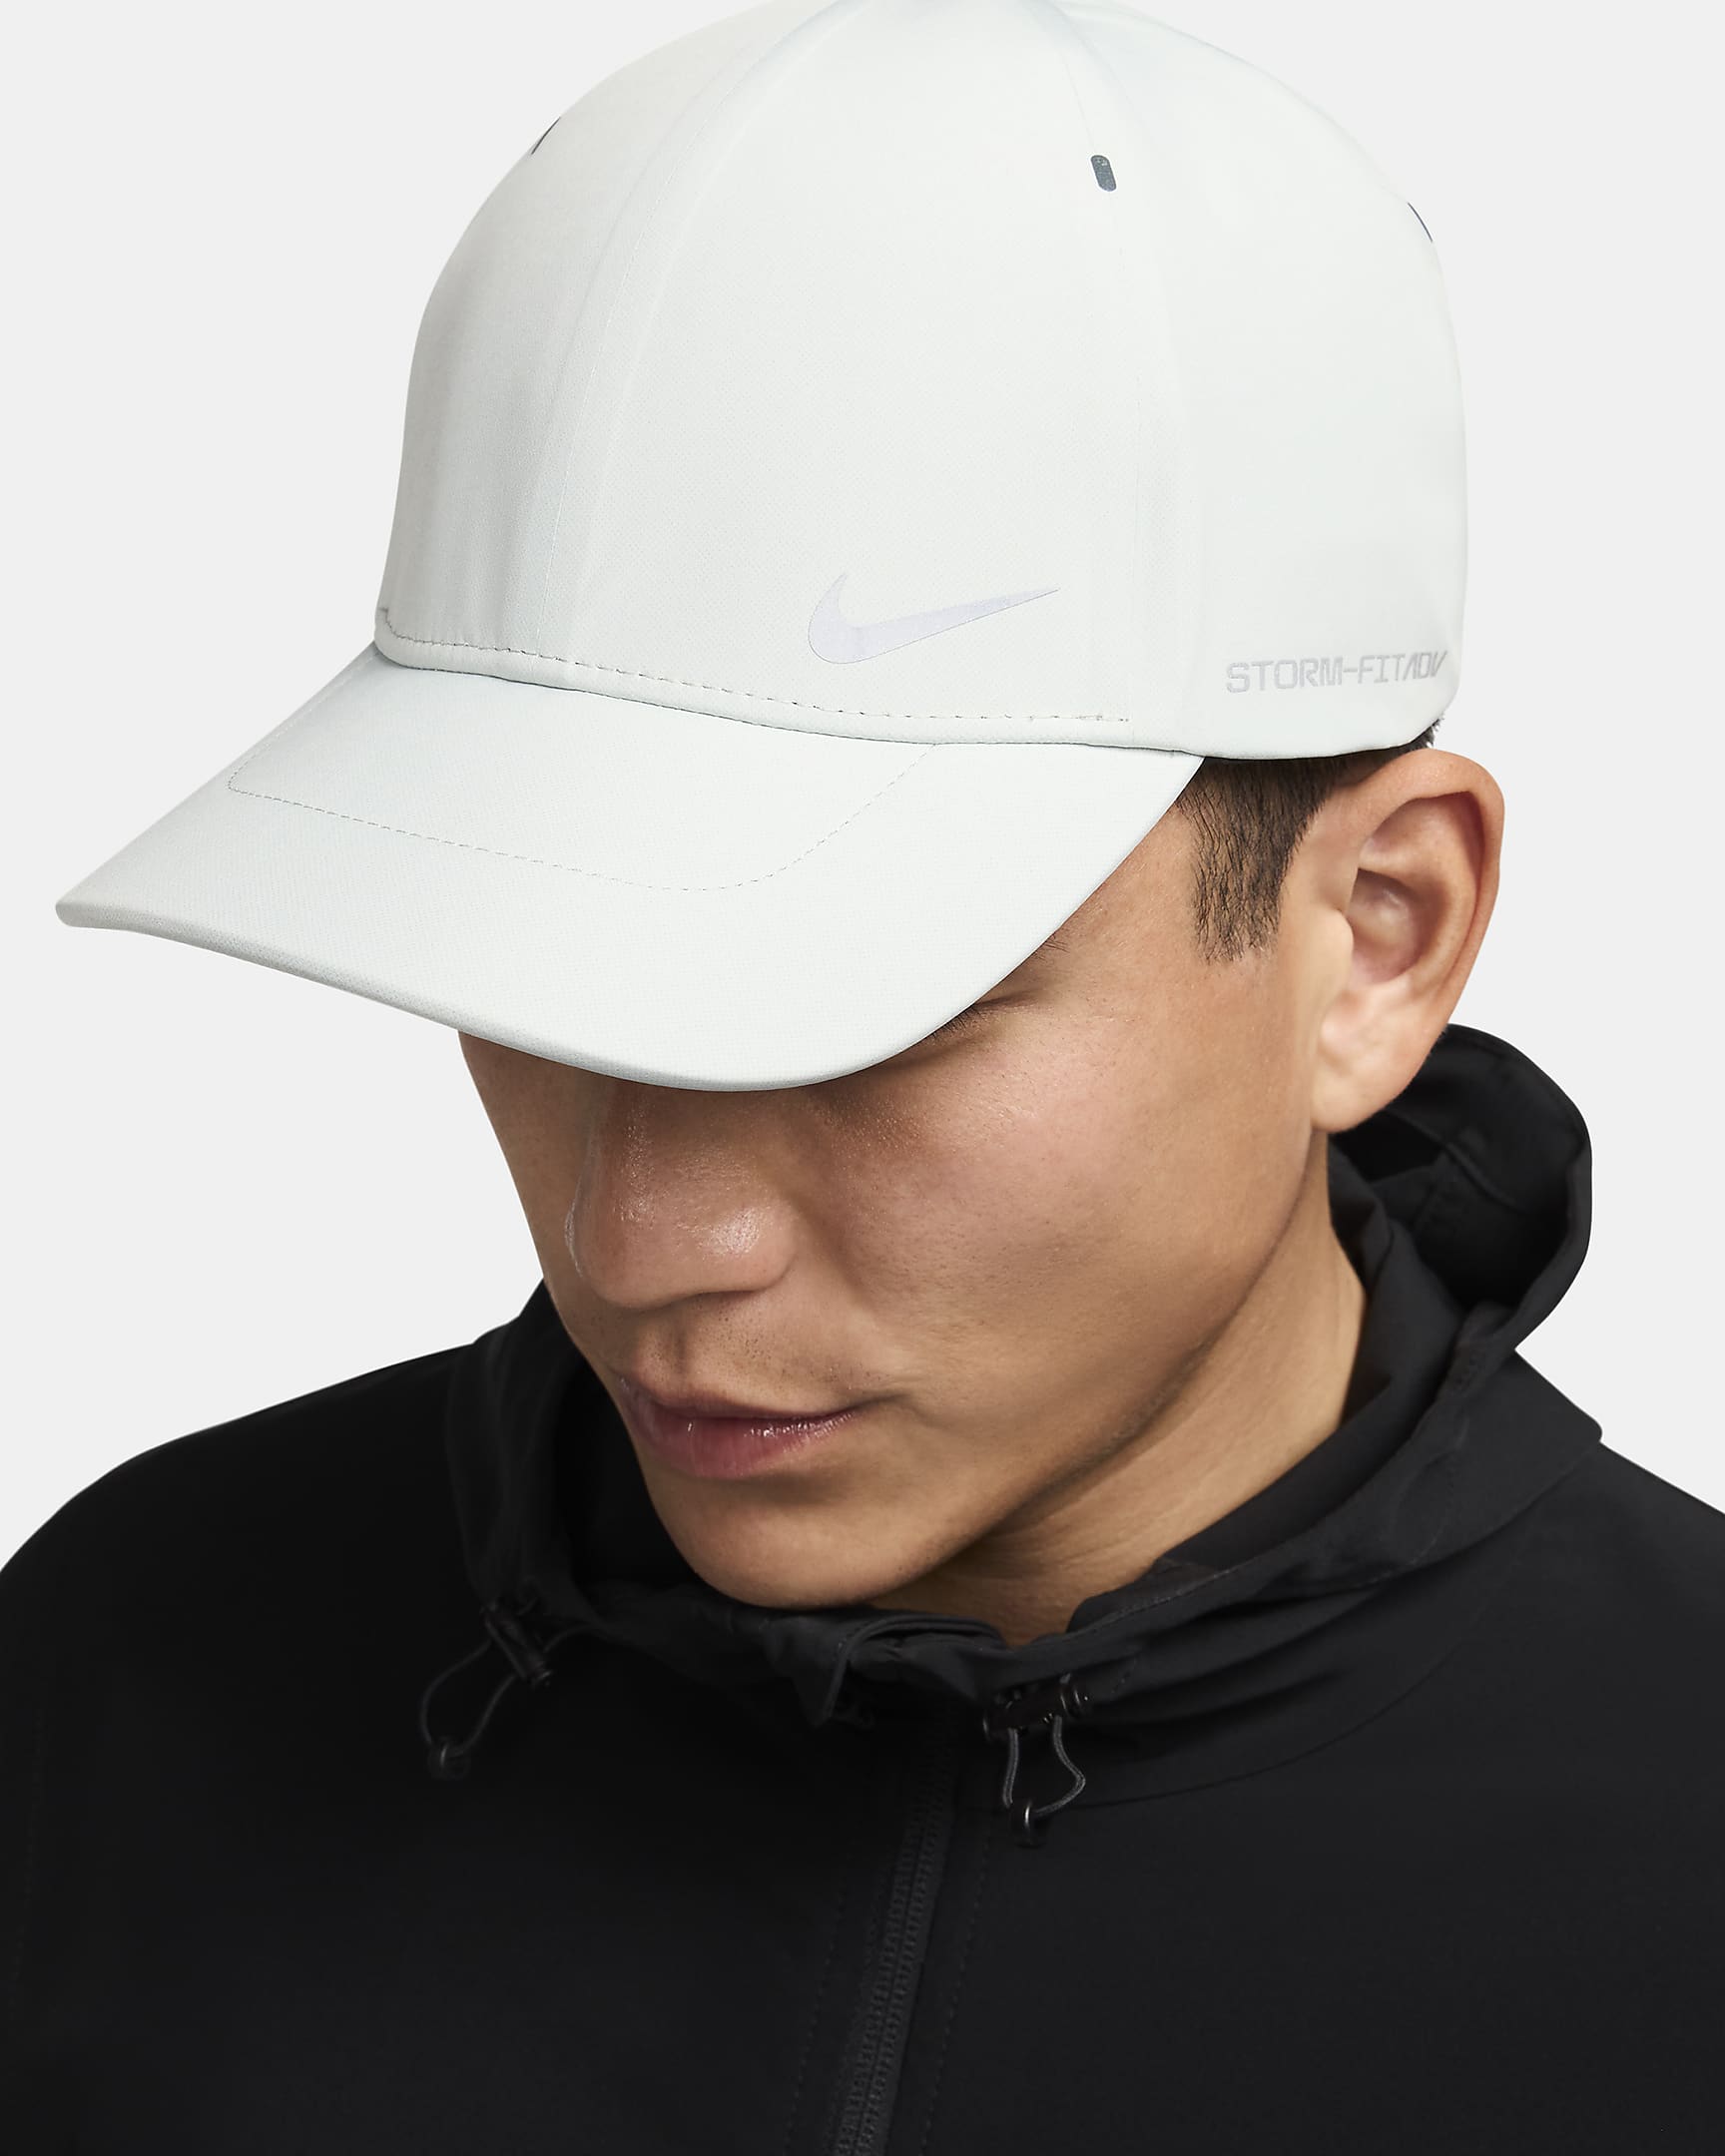 Nike Storm-FIT ADV Club Structured AeroBill Cap - Light Silver